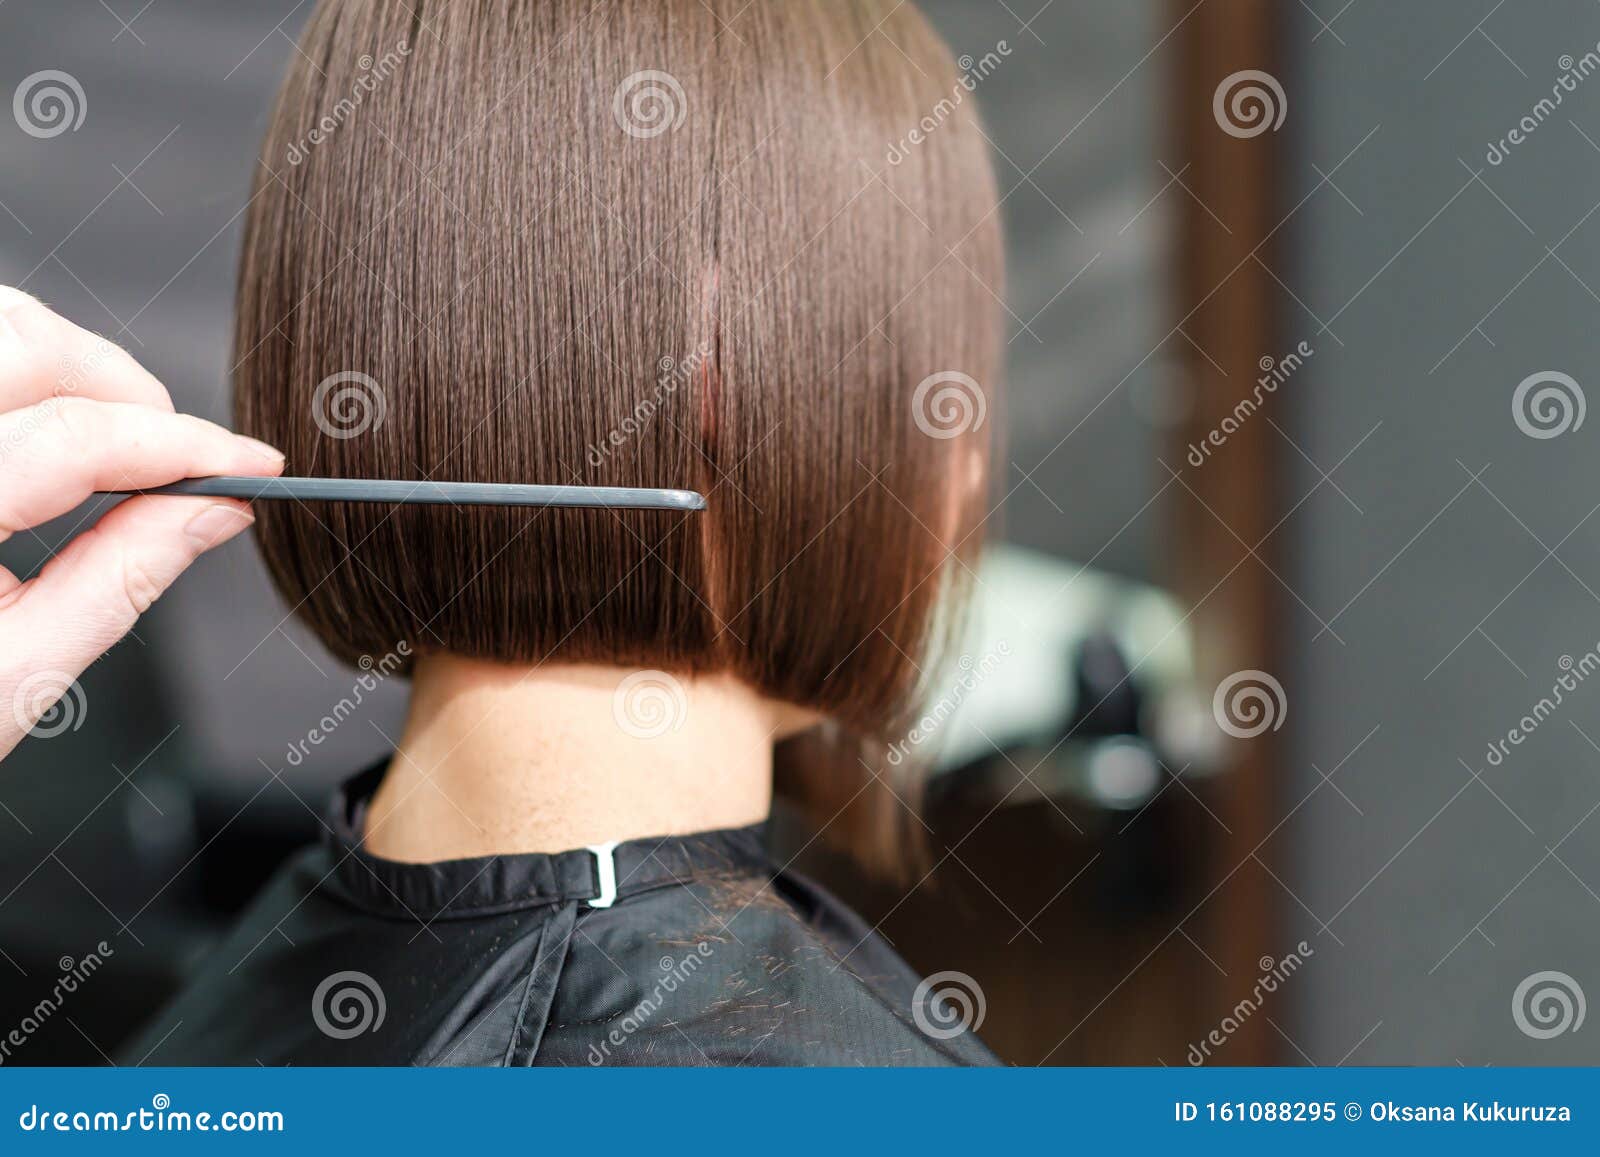 Hand of Hairdresser is Combing a Client`s Short Brown Hair with a Comb  Stock Image - Image of closeup, coiffure: 161088295